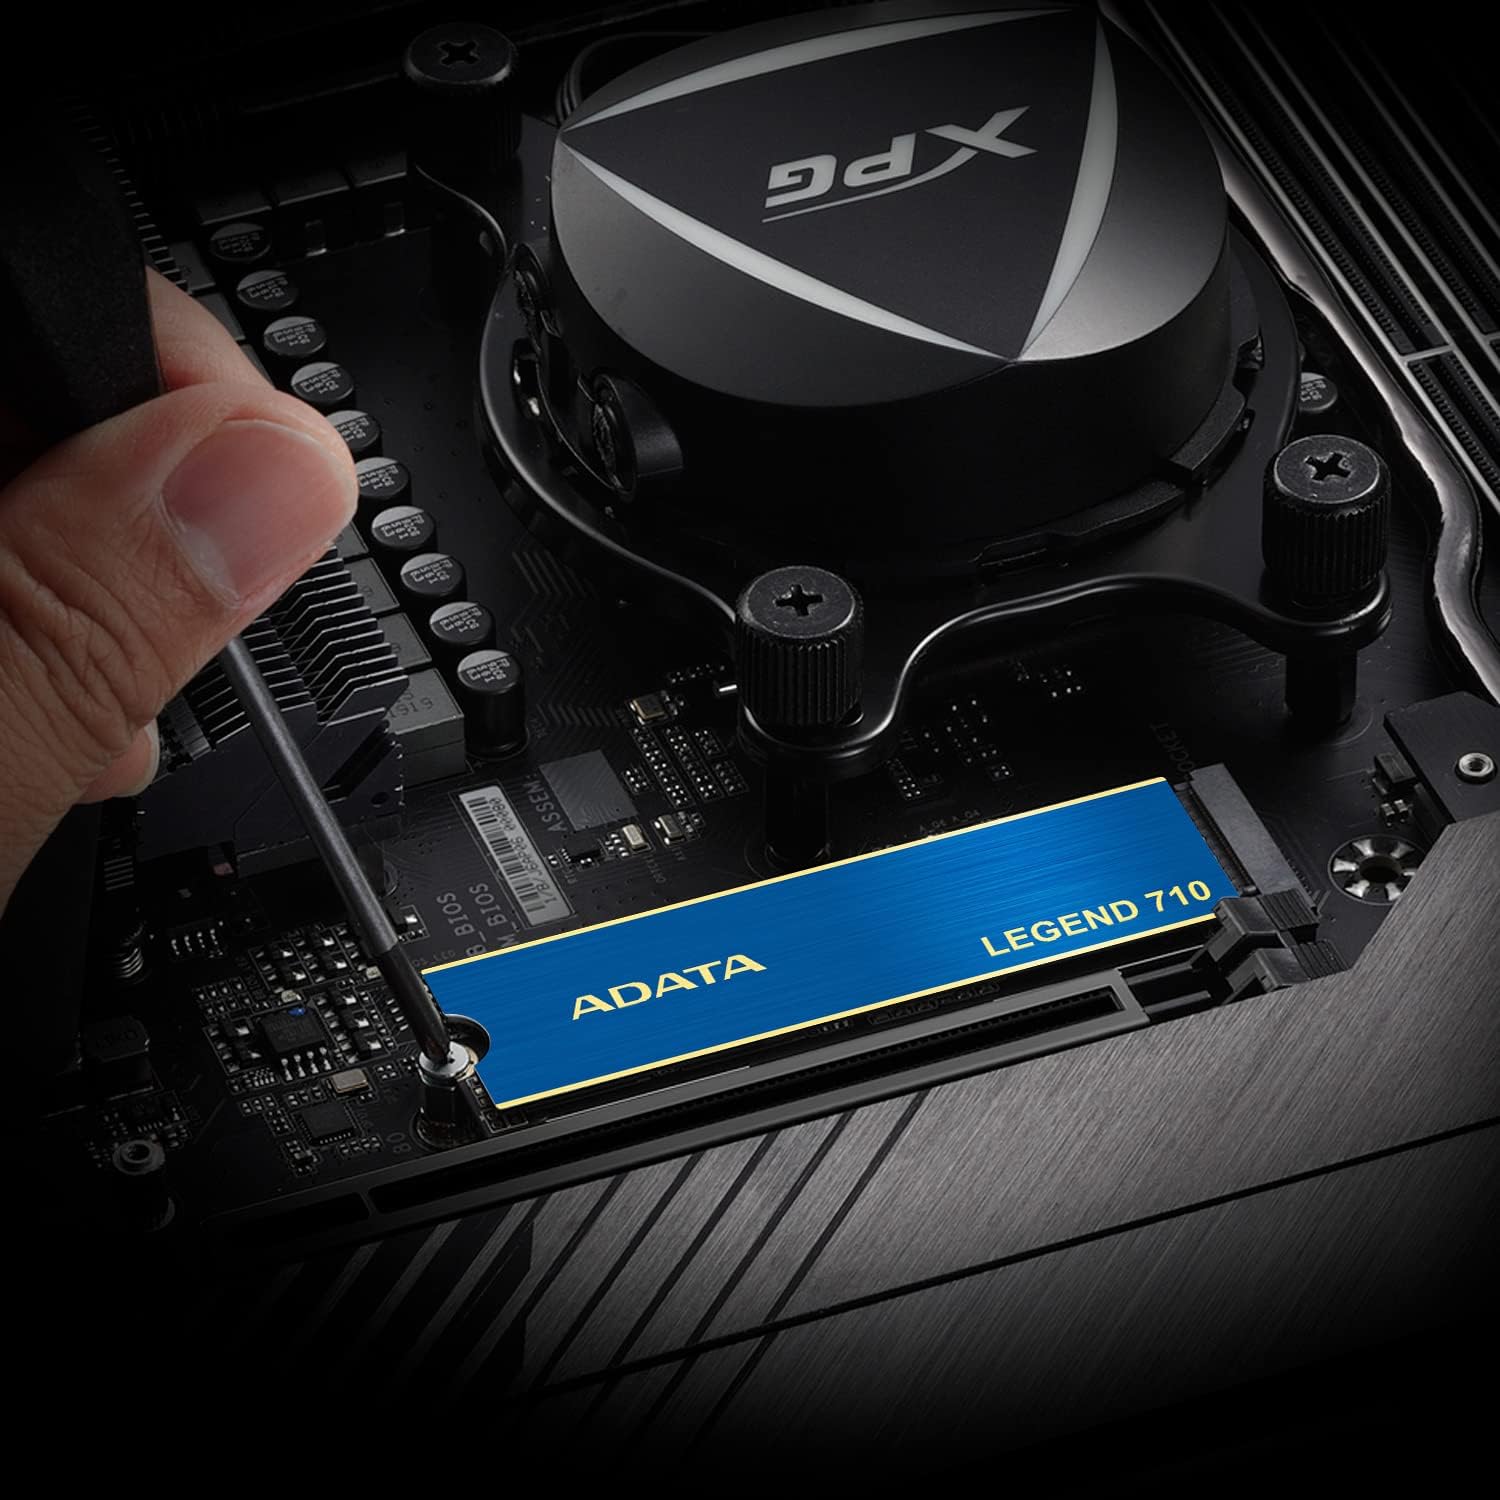 ADATA 2TB SSD Legend 900 PCIe Gen4x4 NVMe M.2 Internal Gaming SSD Up to 7,000 MB/s PS5 Compatible (SLEG-900-2TCS)